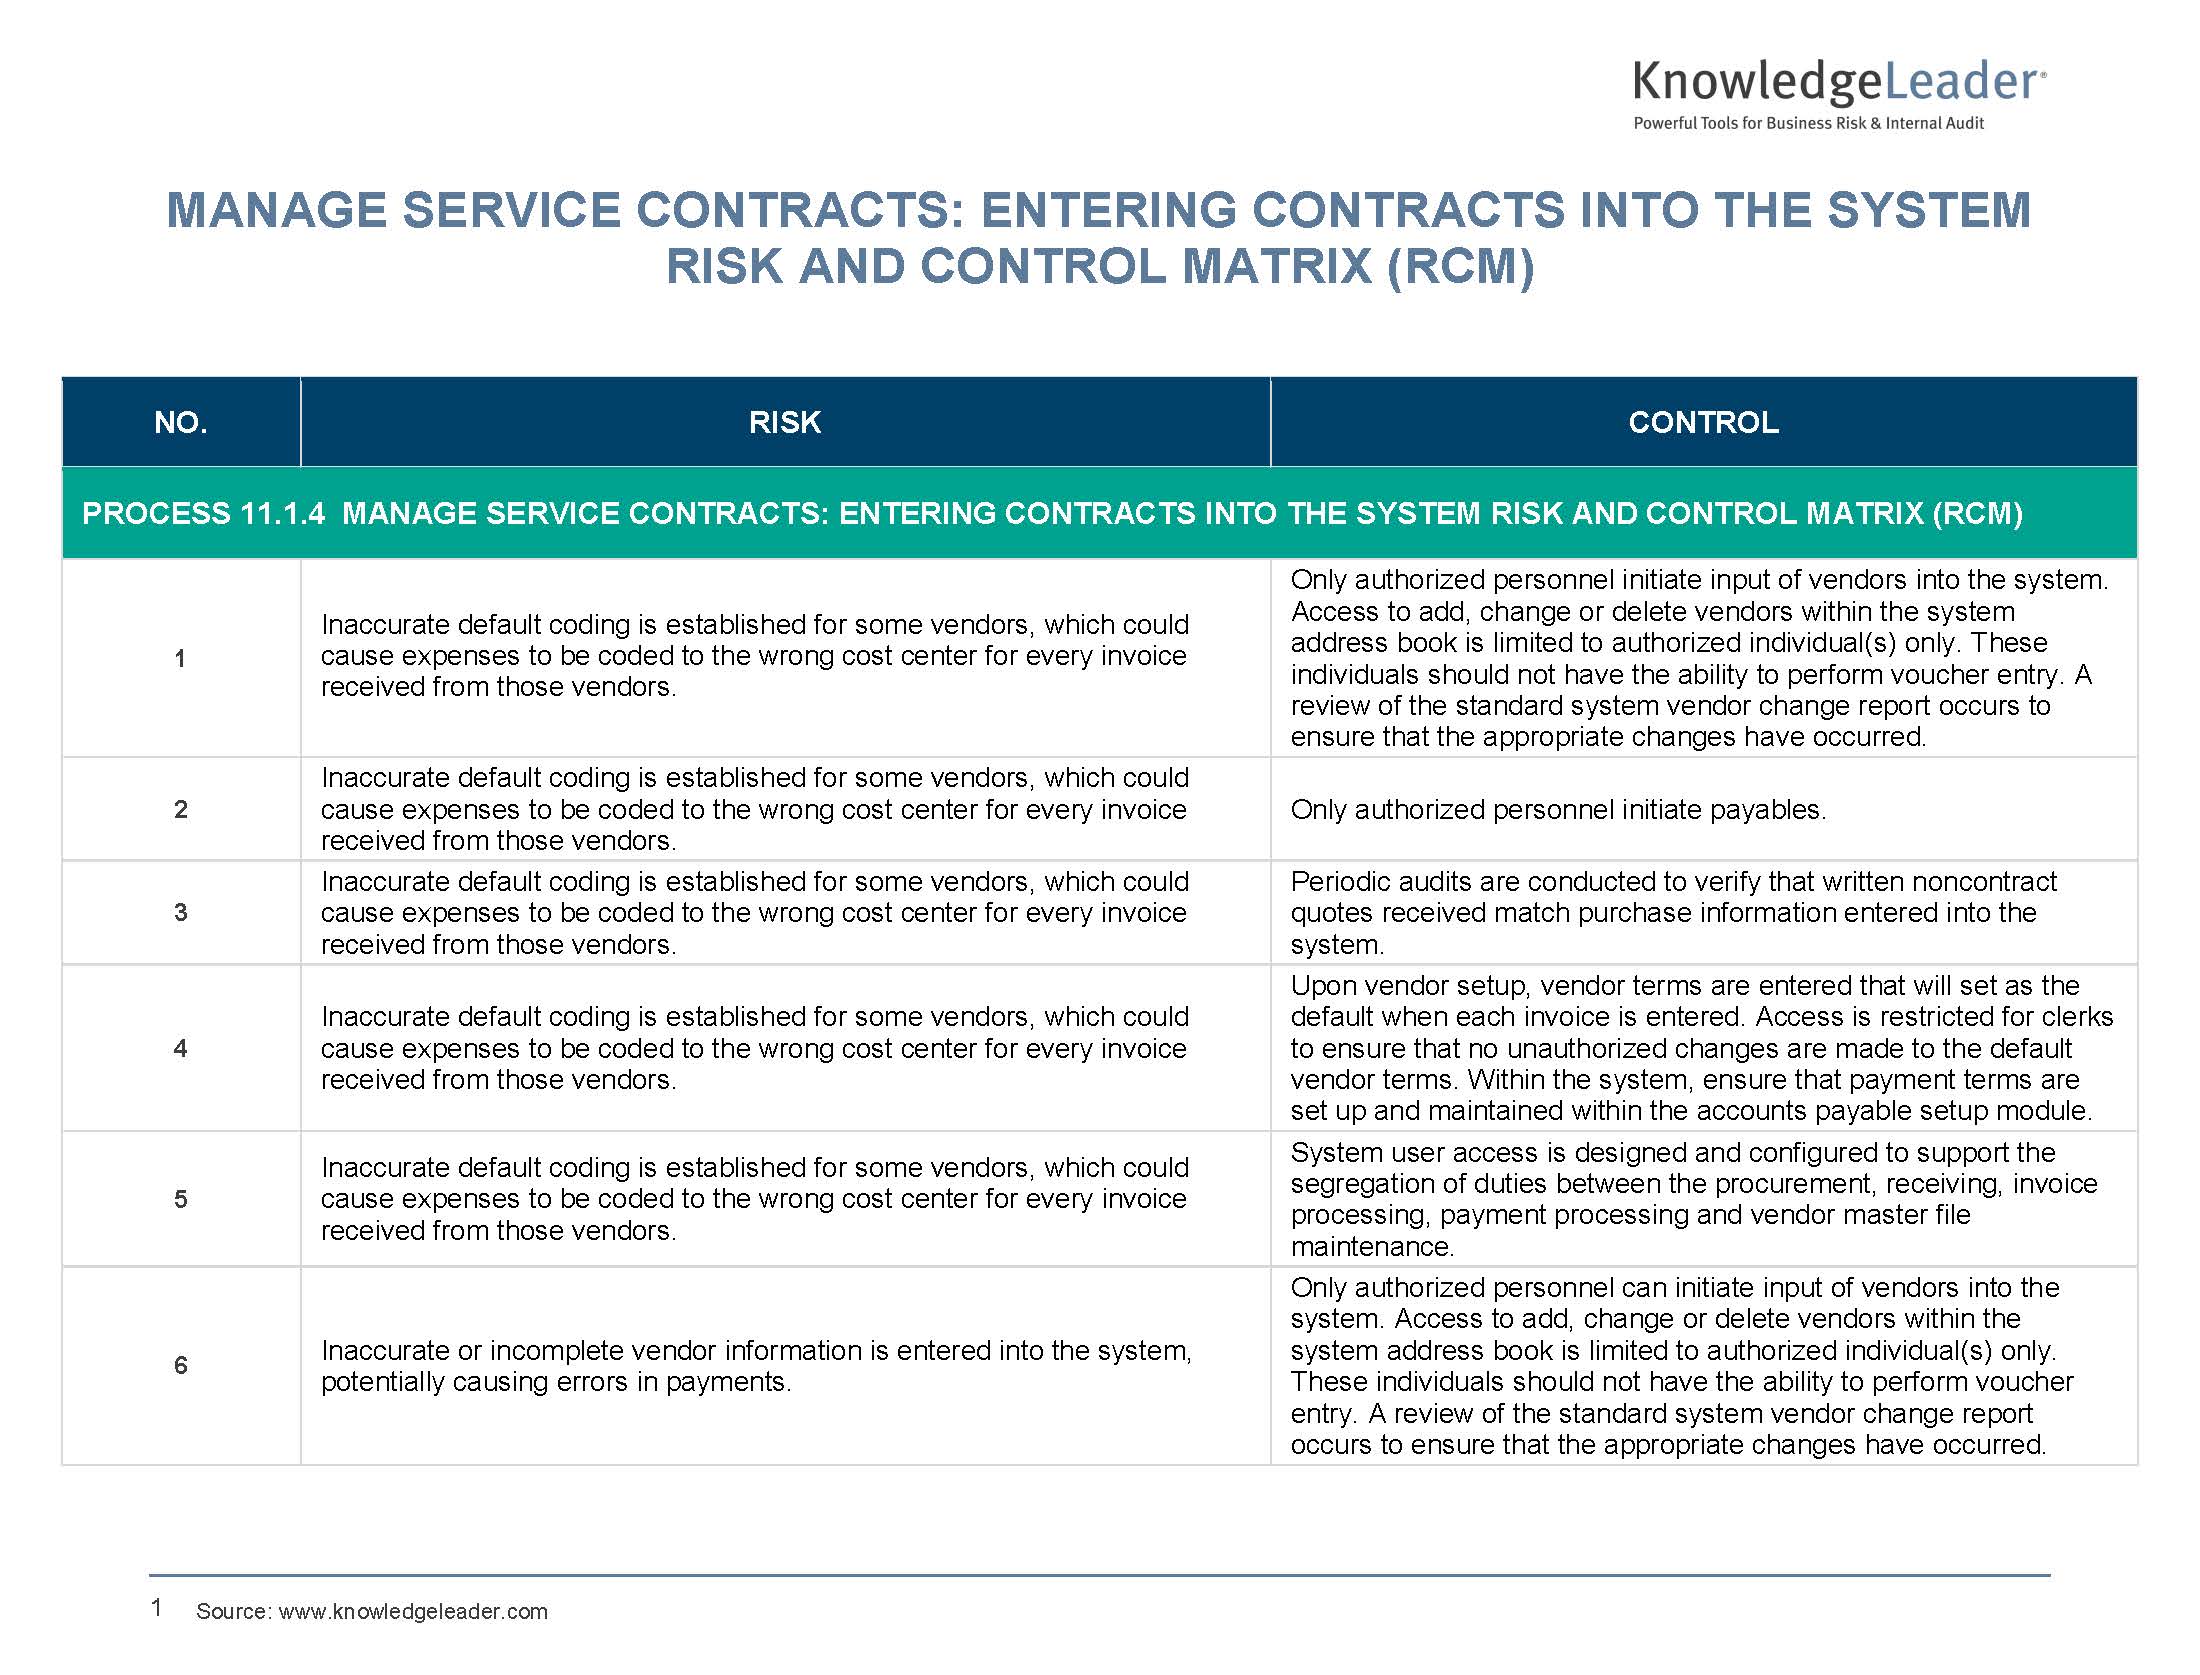 Screenshot of the first page of Manage Service Contracts Entering Contracts into the System RCM